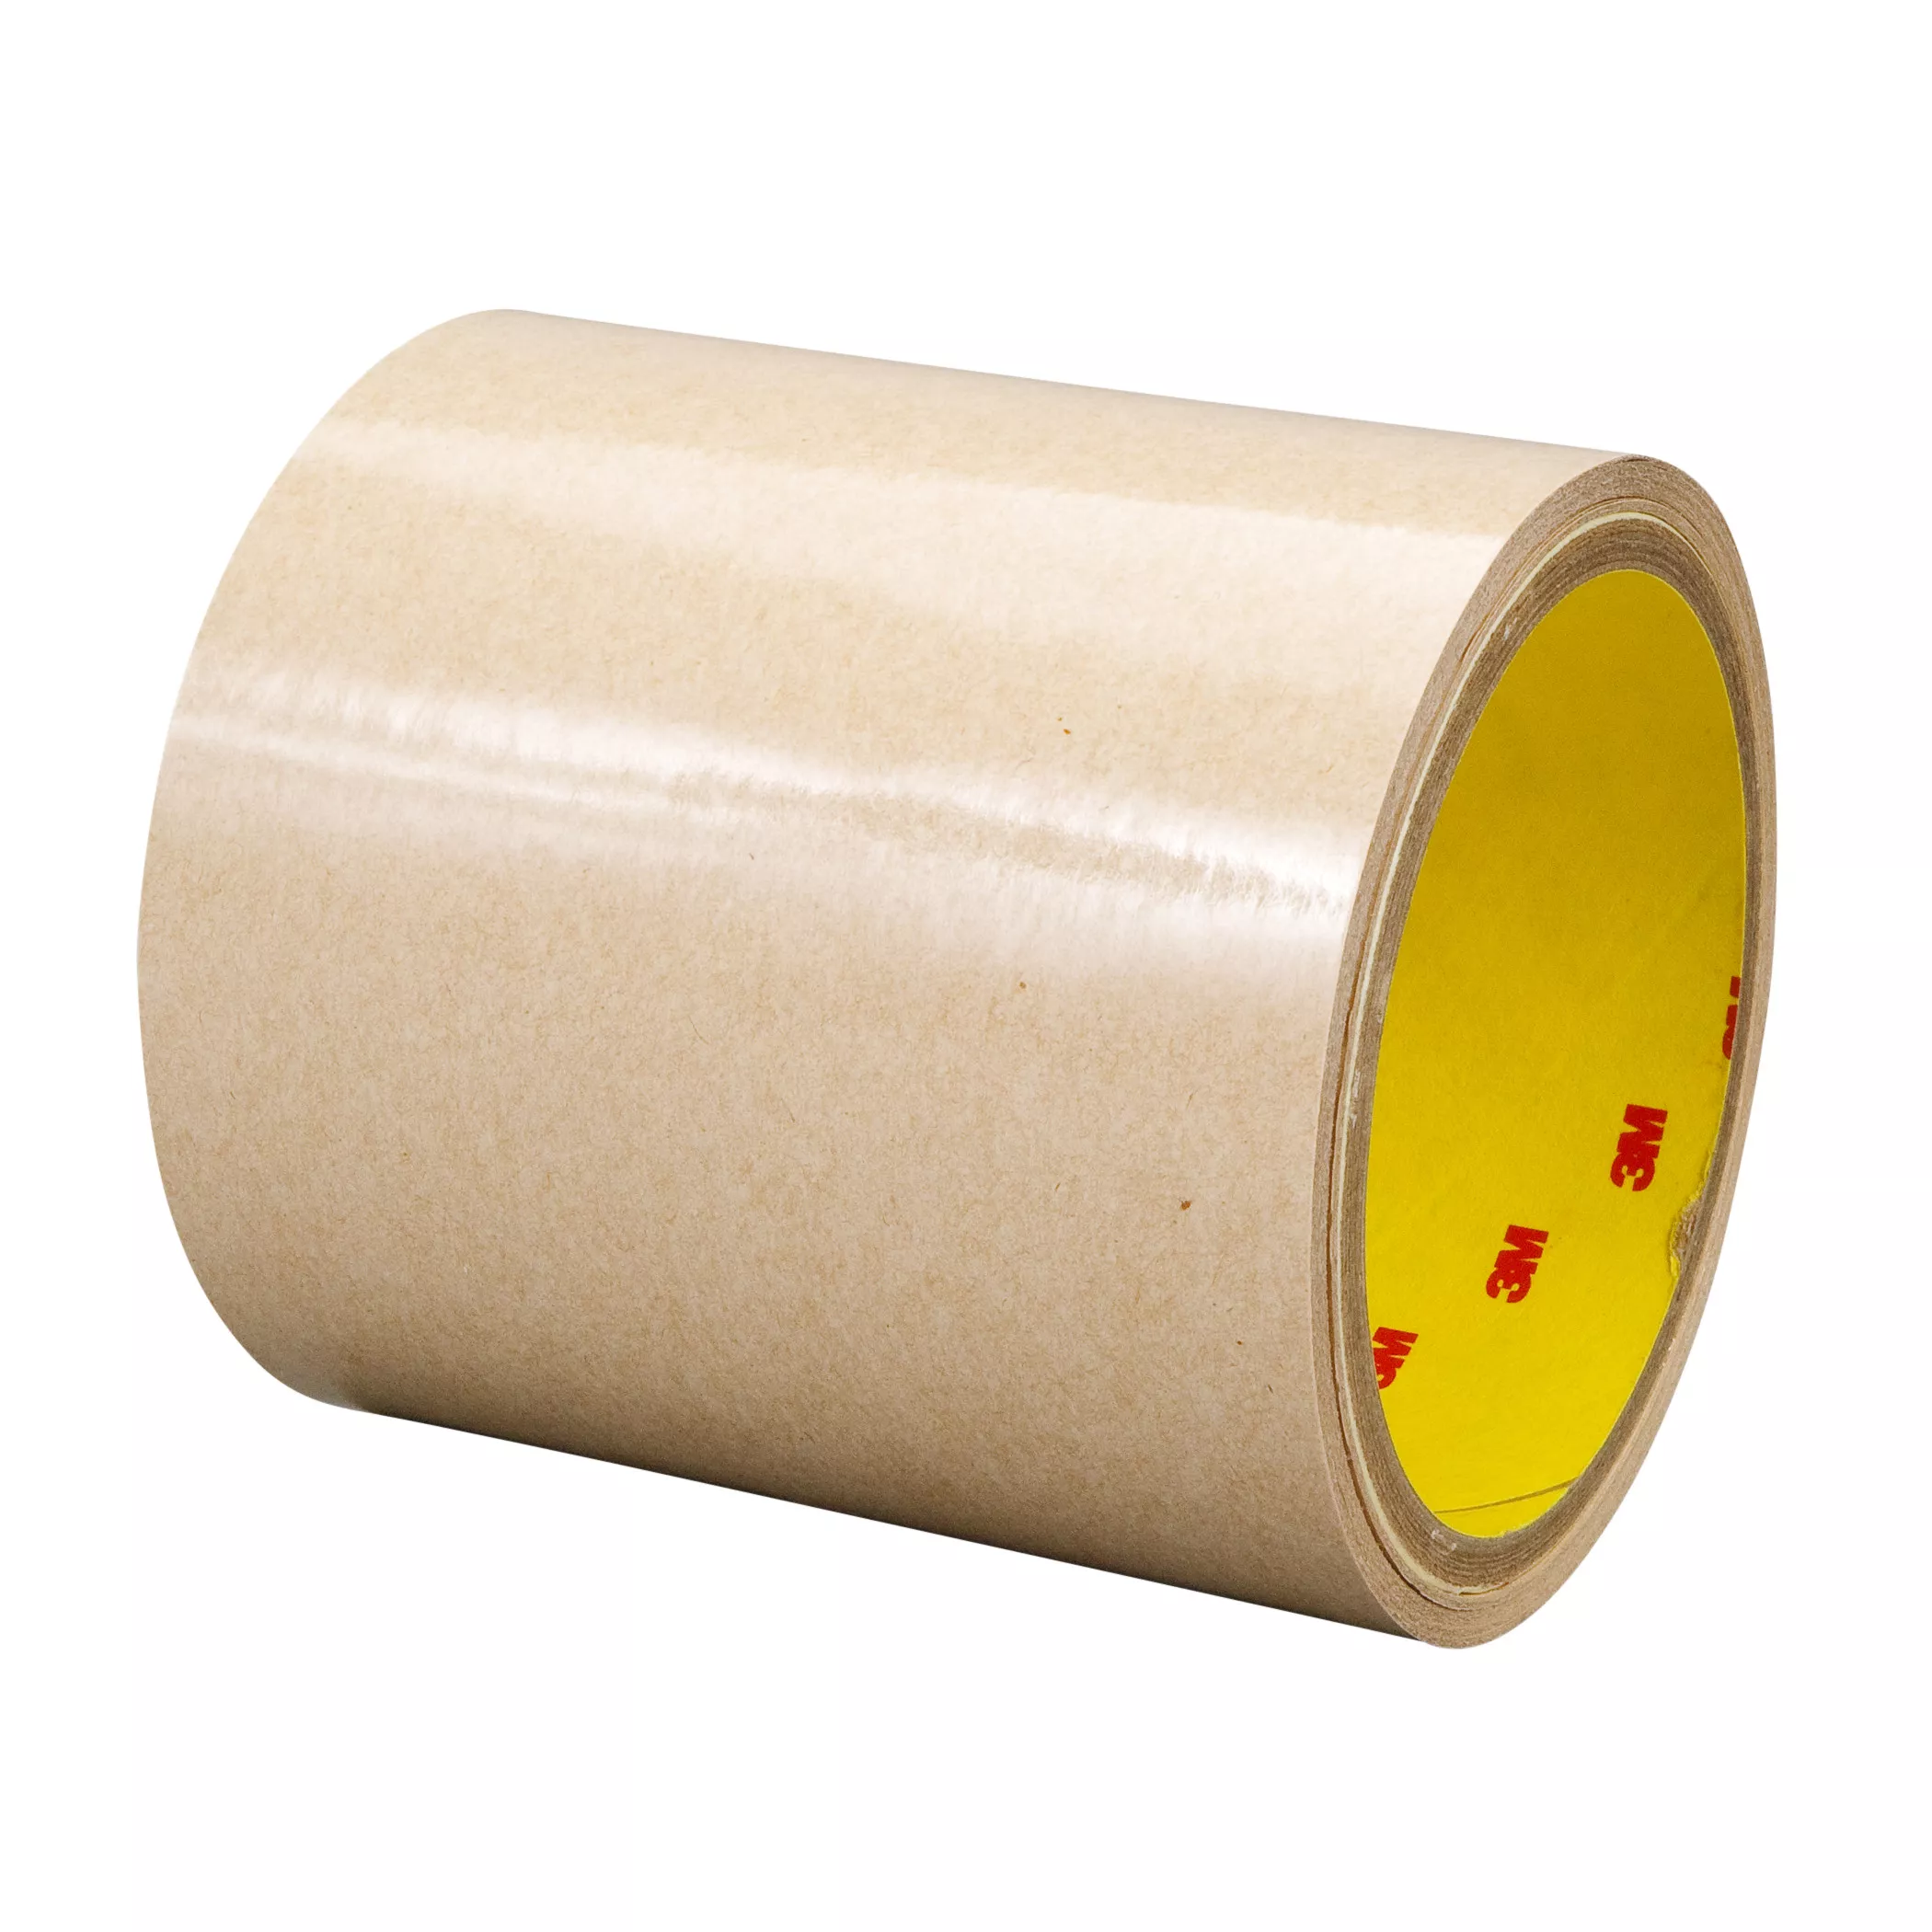 3M™ Adhesive Transfer Tape 9626, Clear, 54 in x 60 yd, 2 mil, 1
Roll/Case